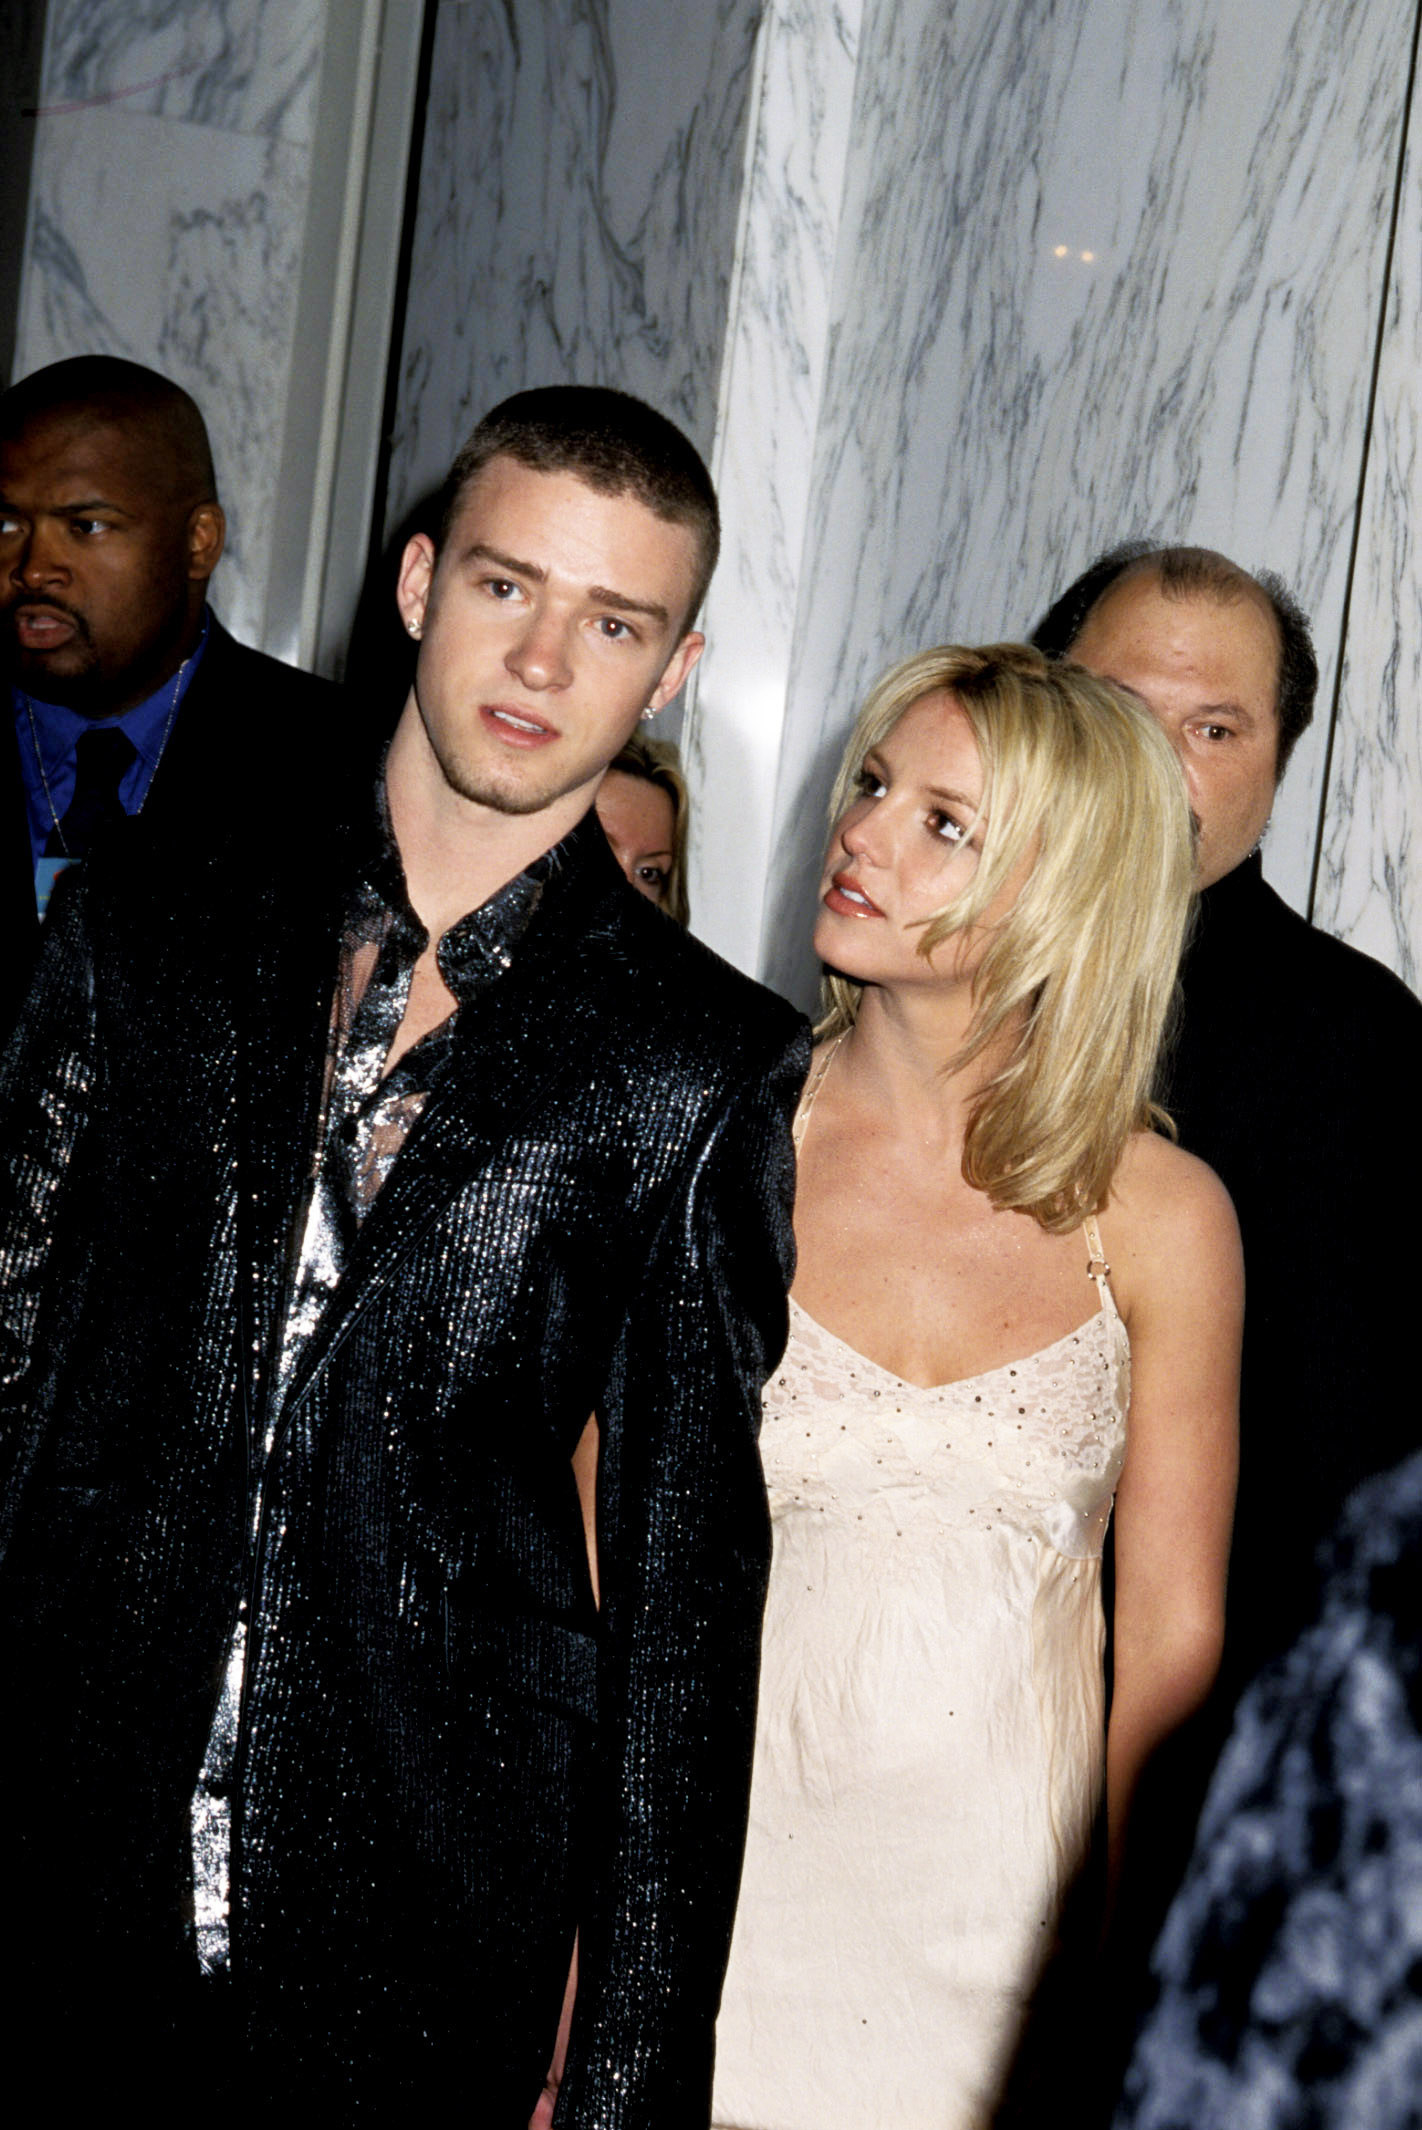 TBT: Justin Timberlake and Britney Spears